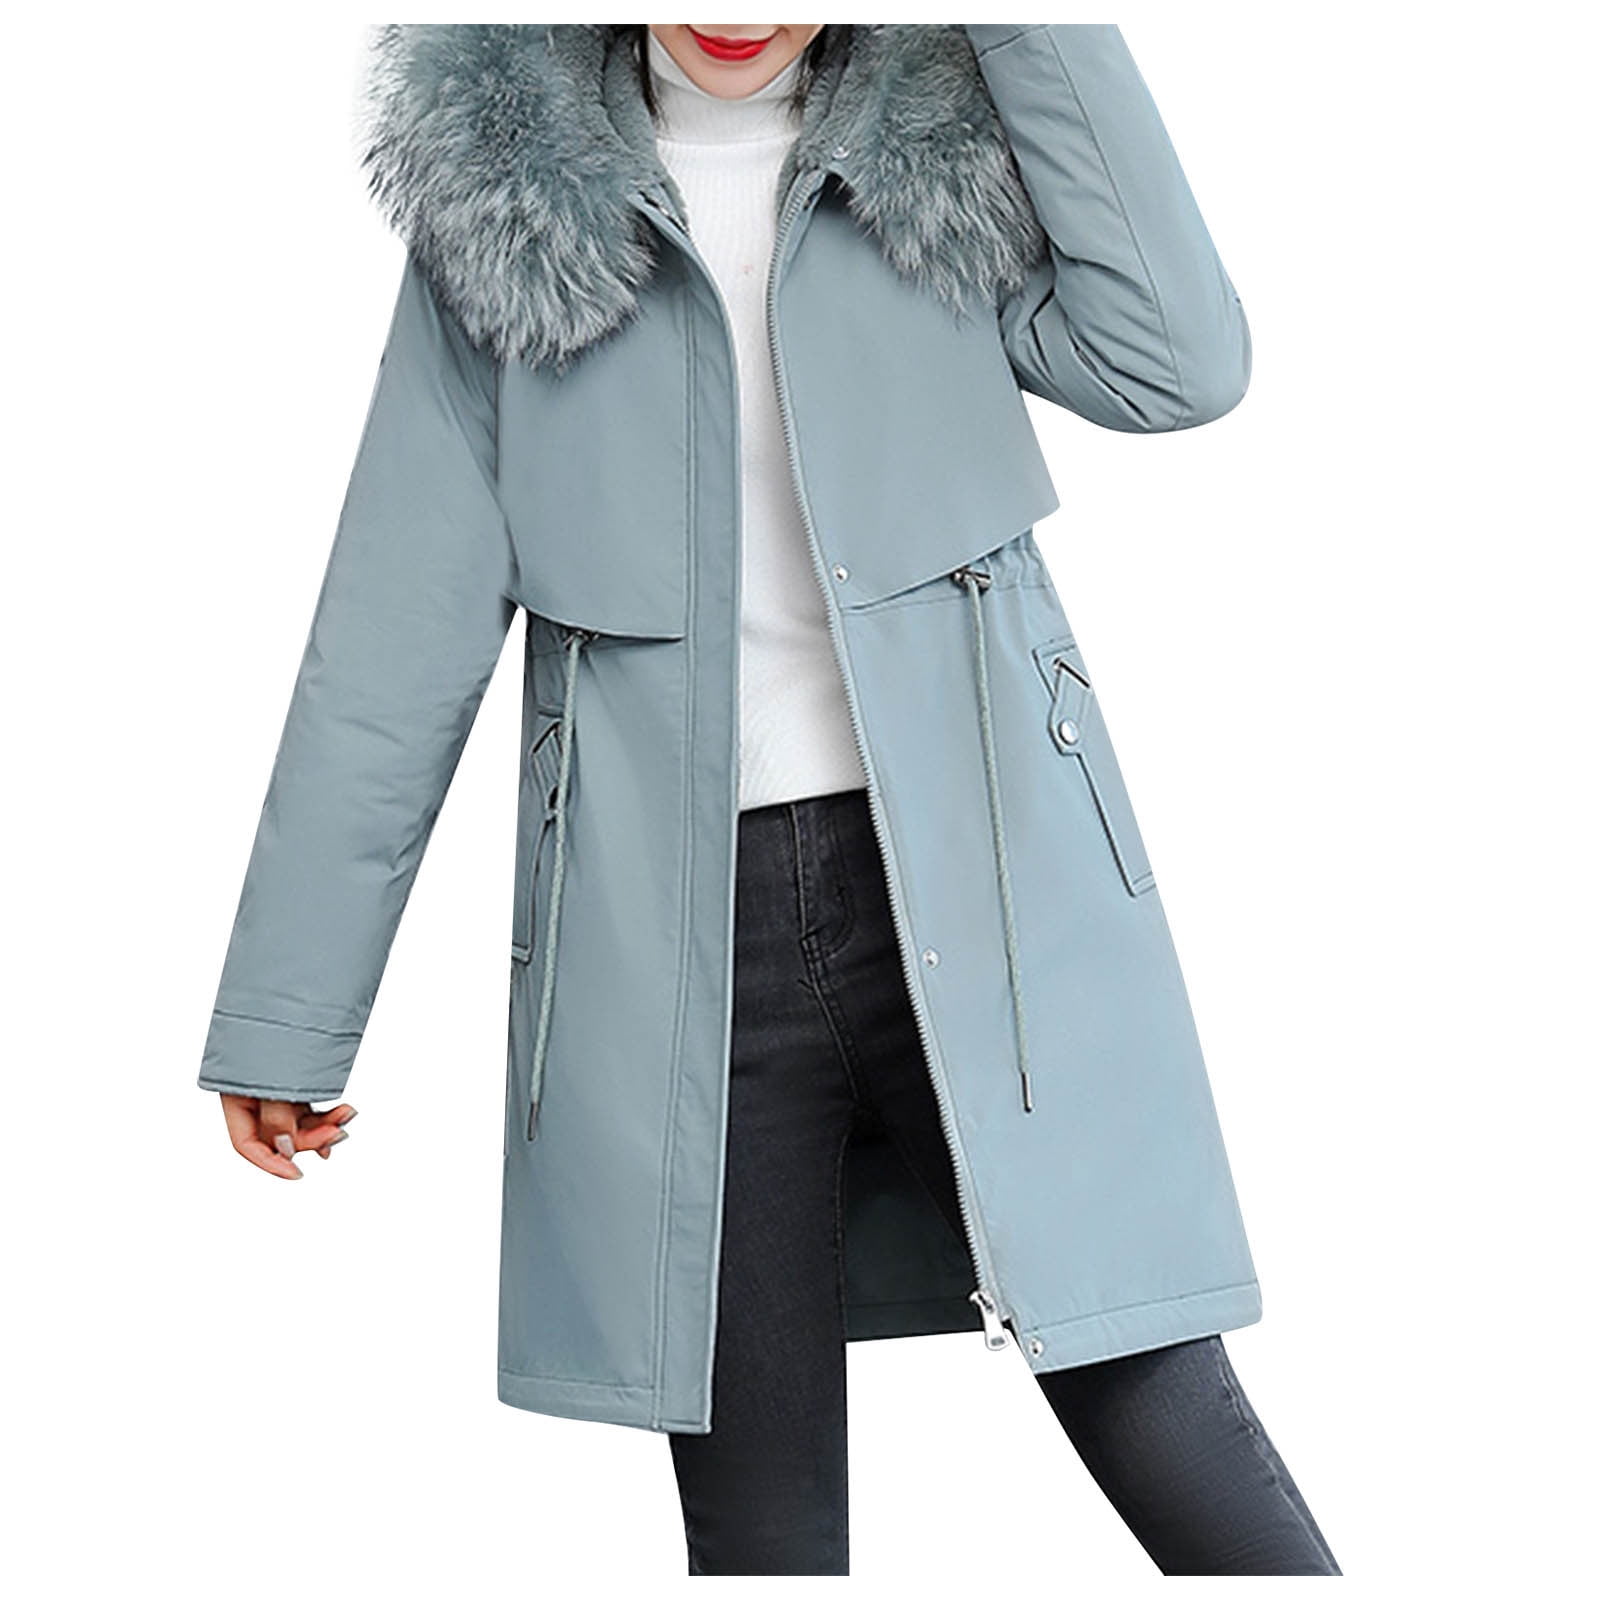 Liveday Women's Winter Jackets Plush Lined Mid-Length Coat with